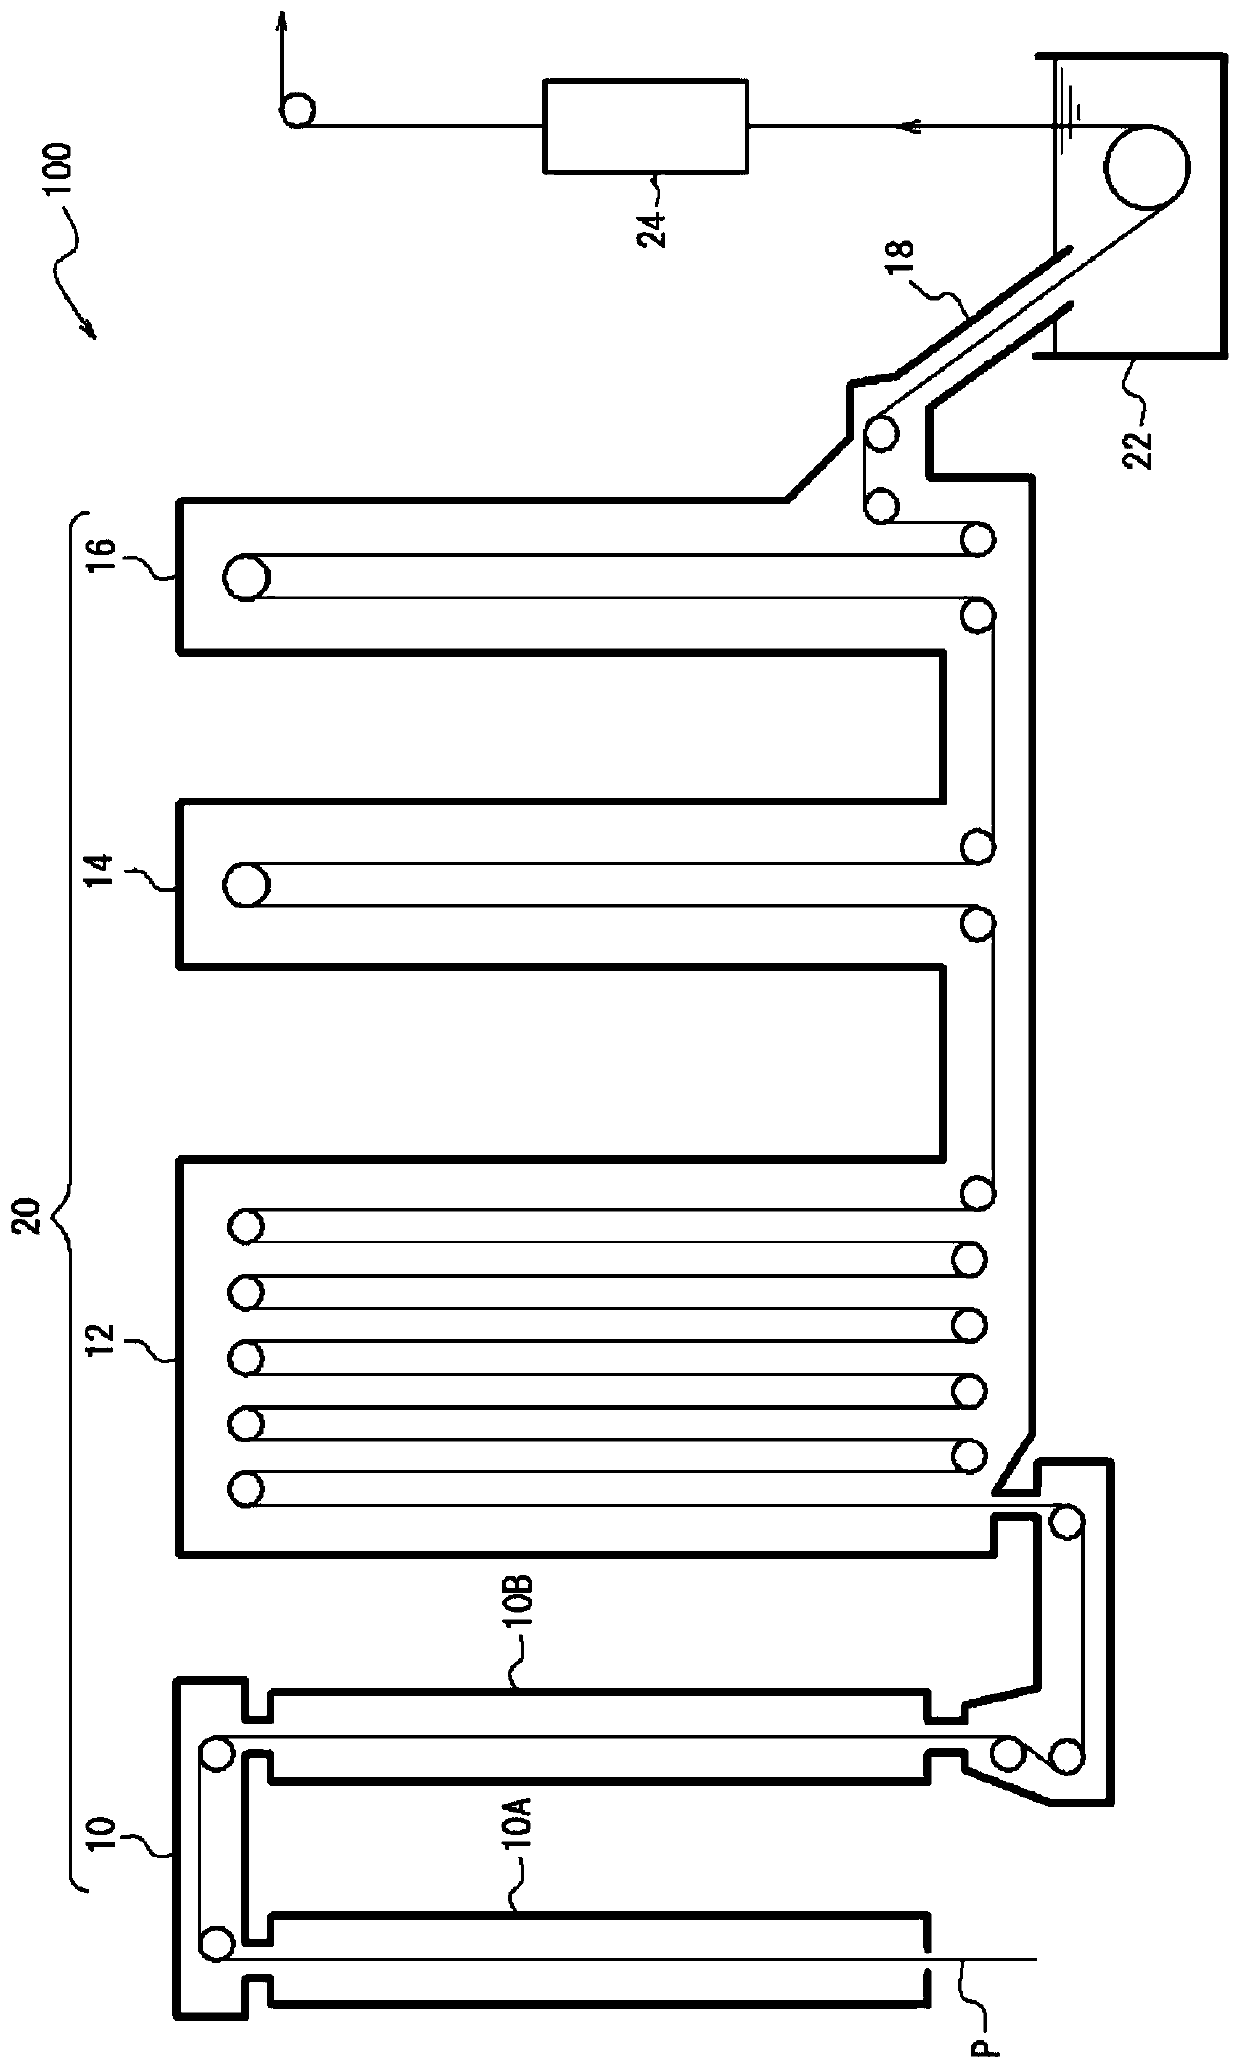 Continuous hot-dip galvanizing apparatus and method for manufacturing hot-dip galvanized steel sheet